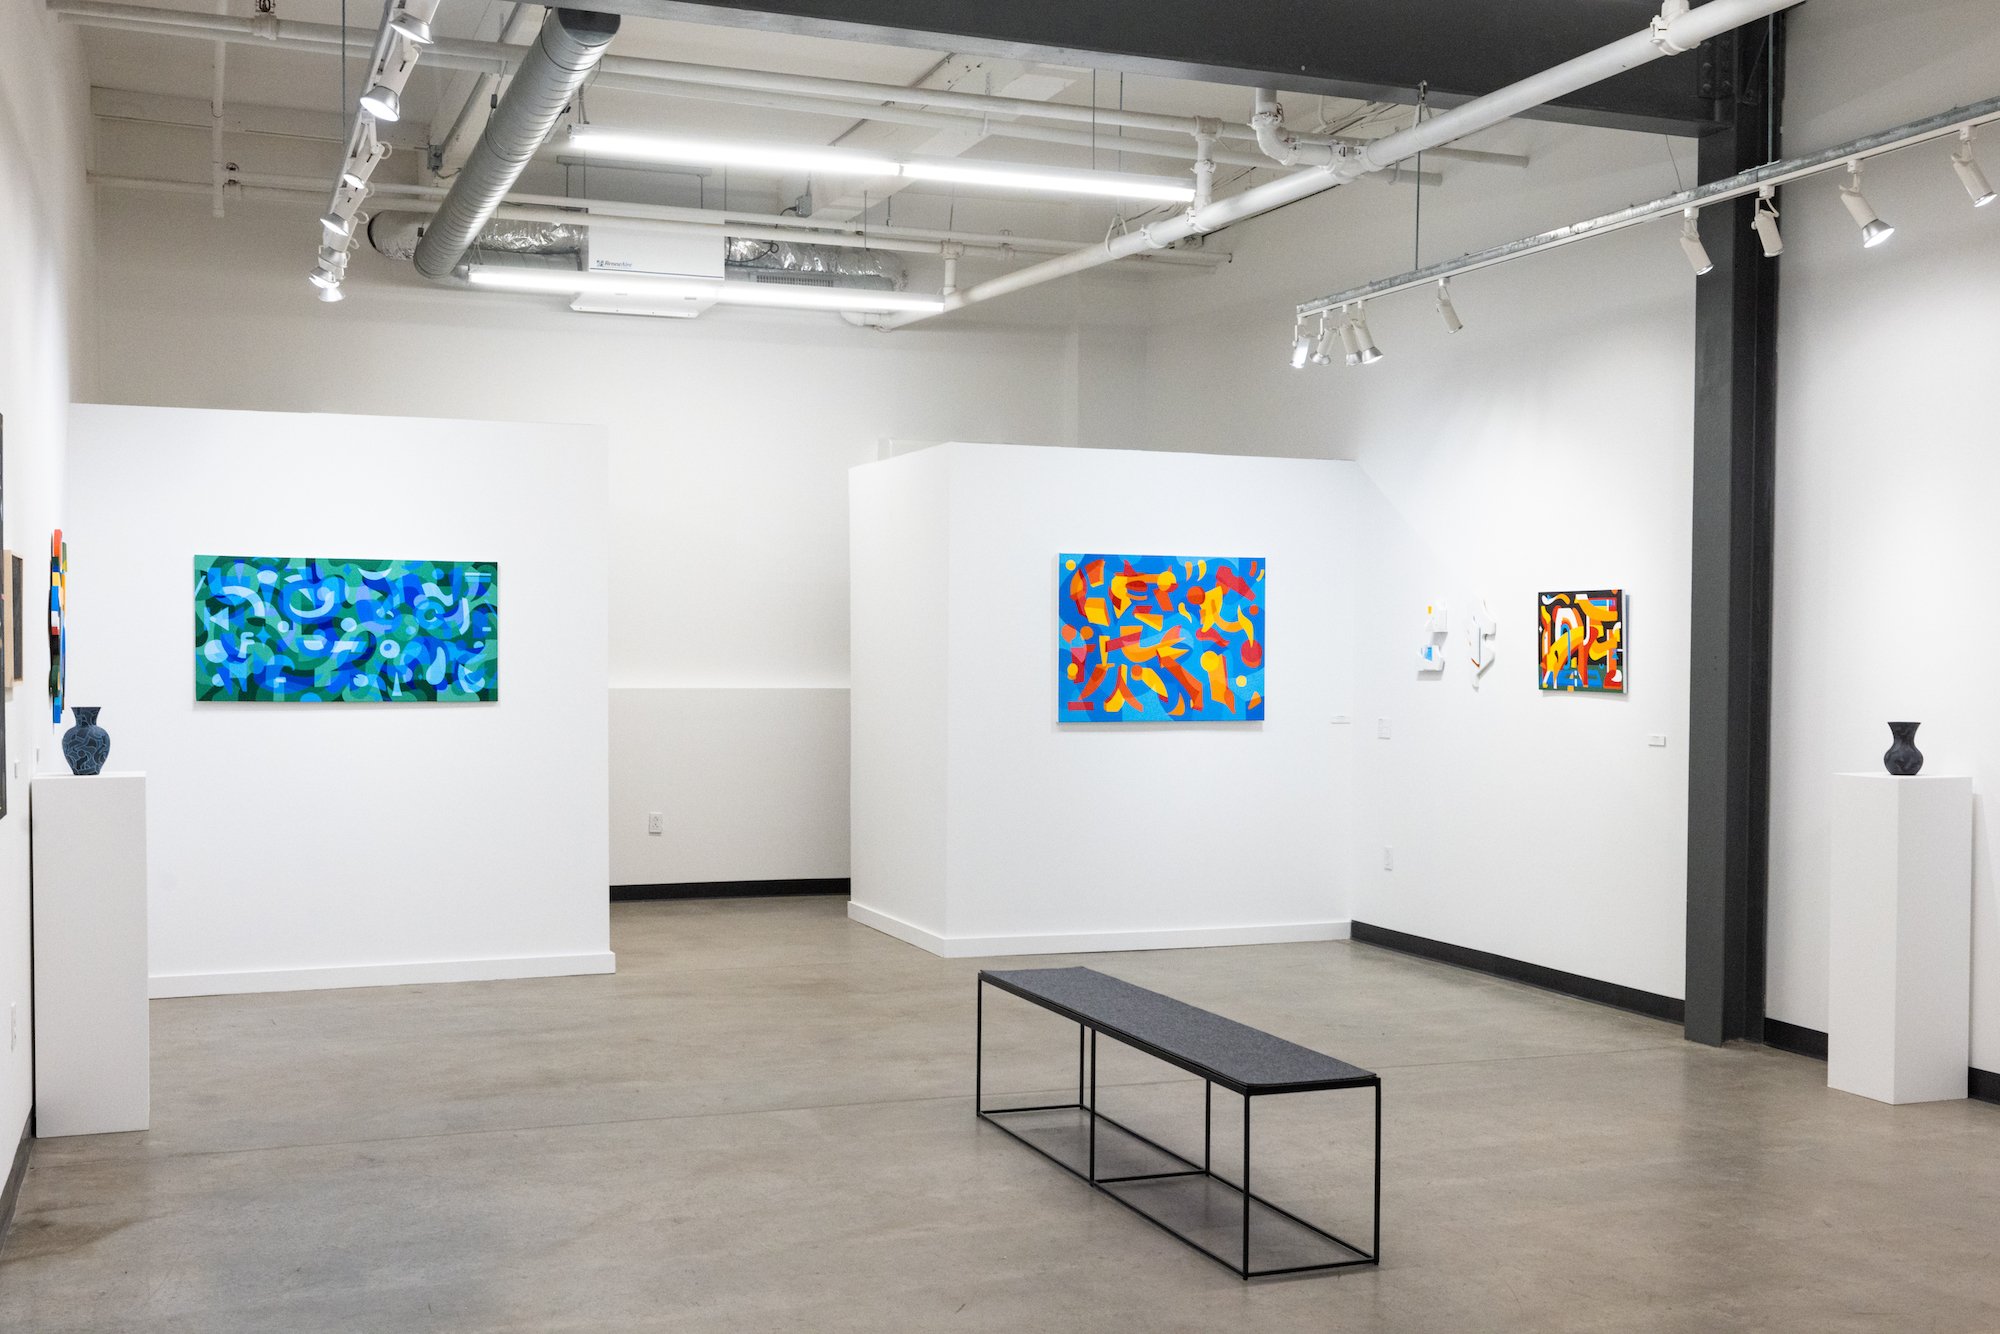 Art Gallery Installation View of Will Gebhard's Solo Exhibition of Original Abstract Paintings at Soapbox Arts Gallery in Burlington, Vermont